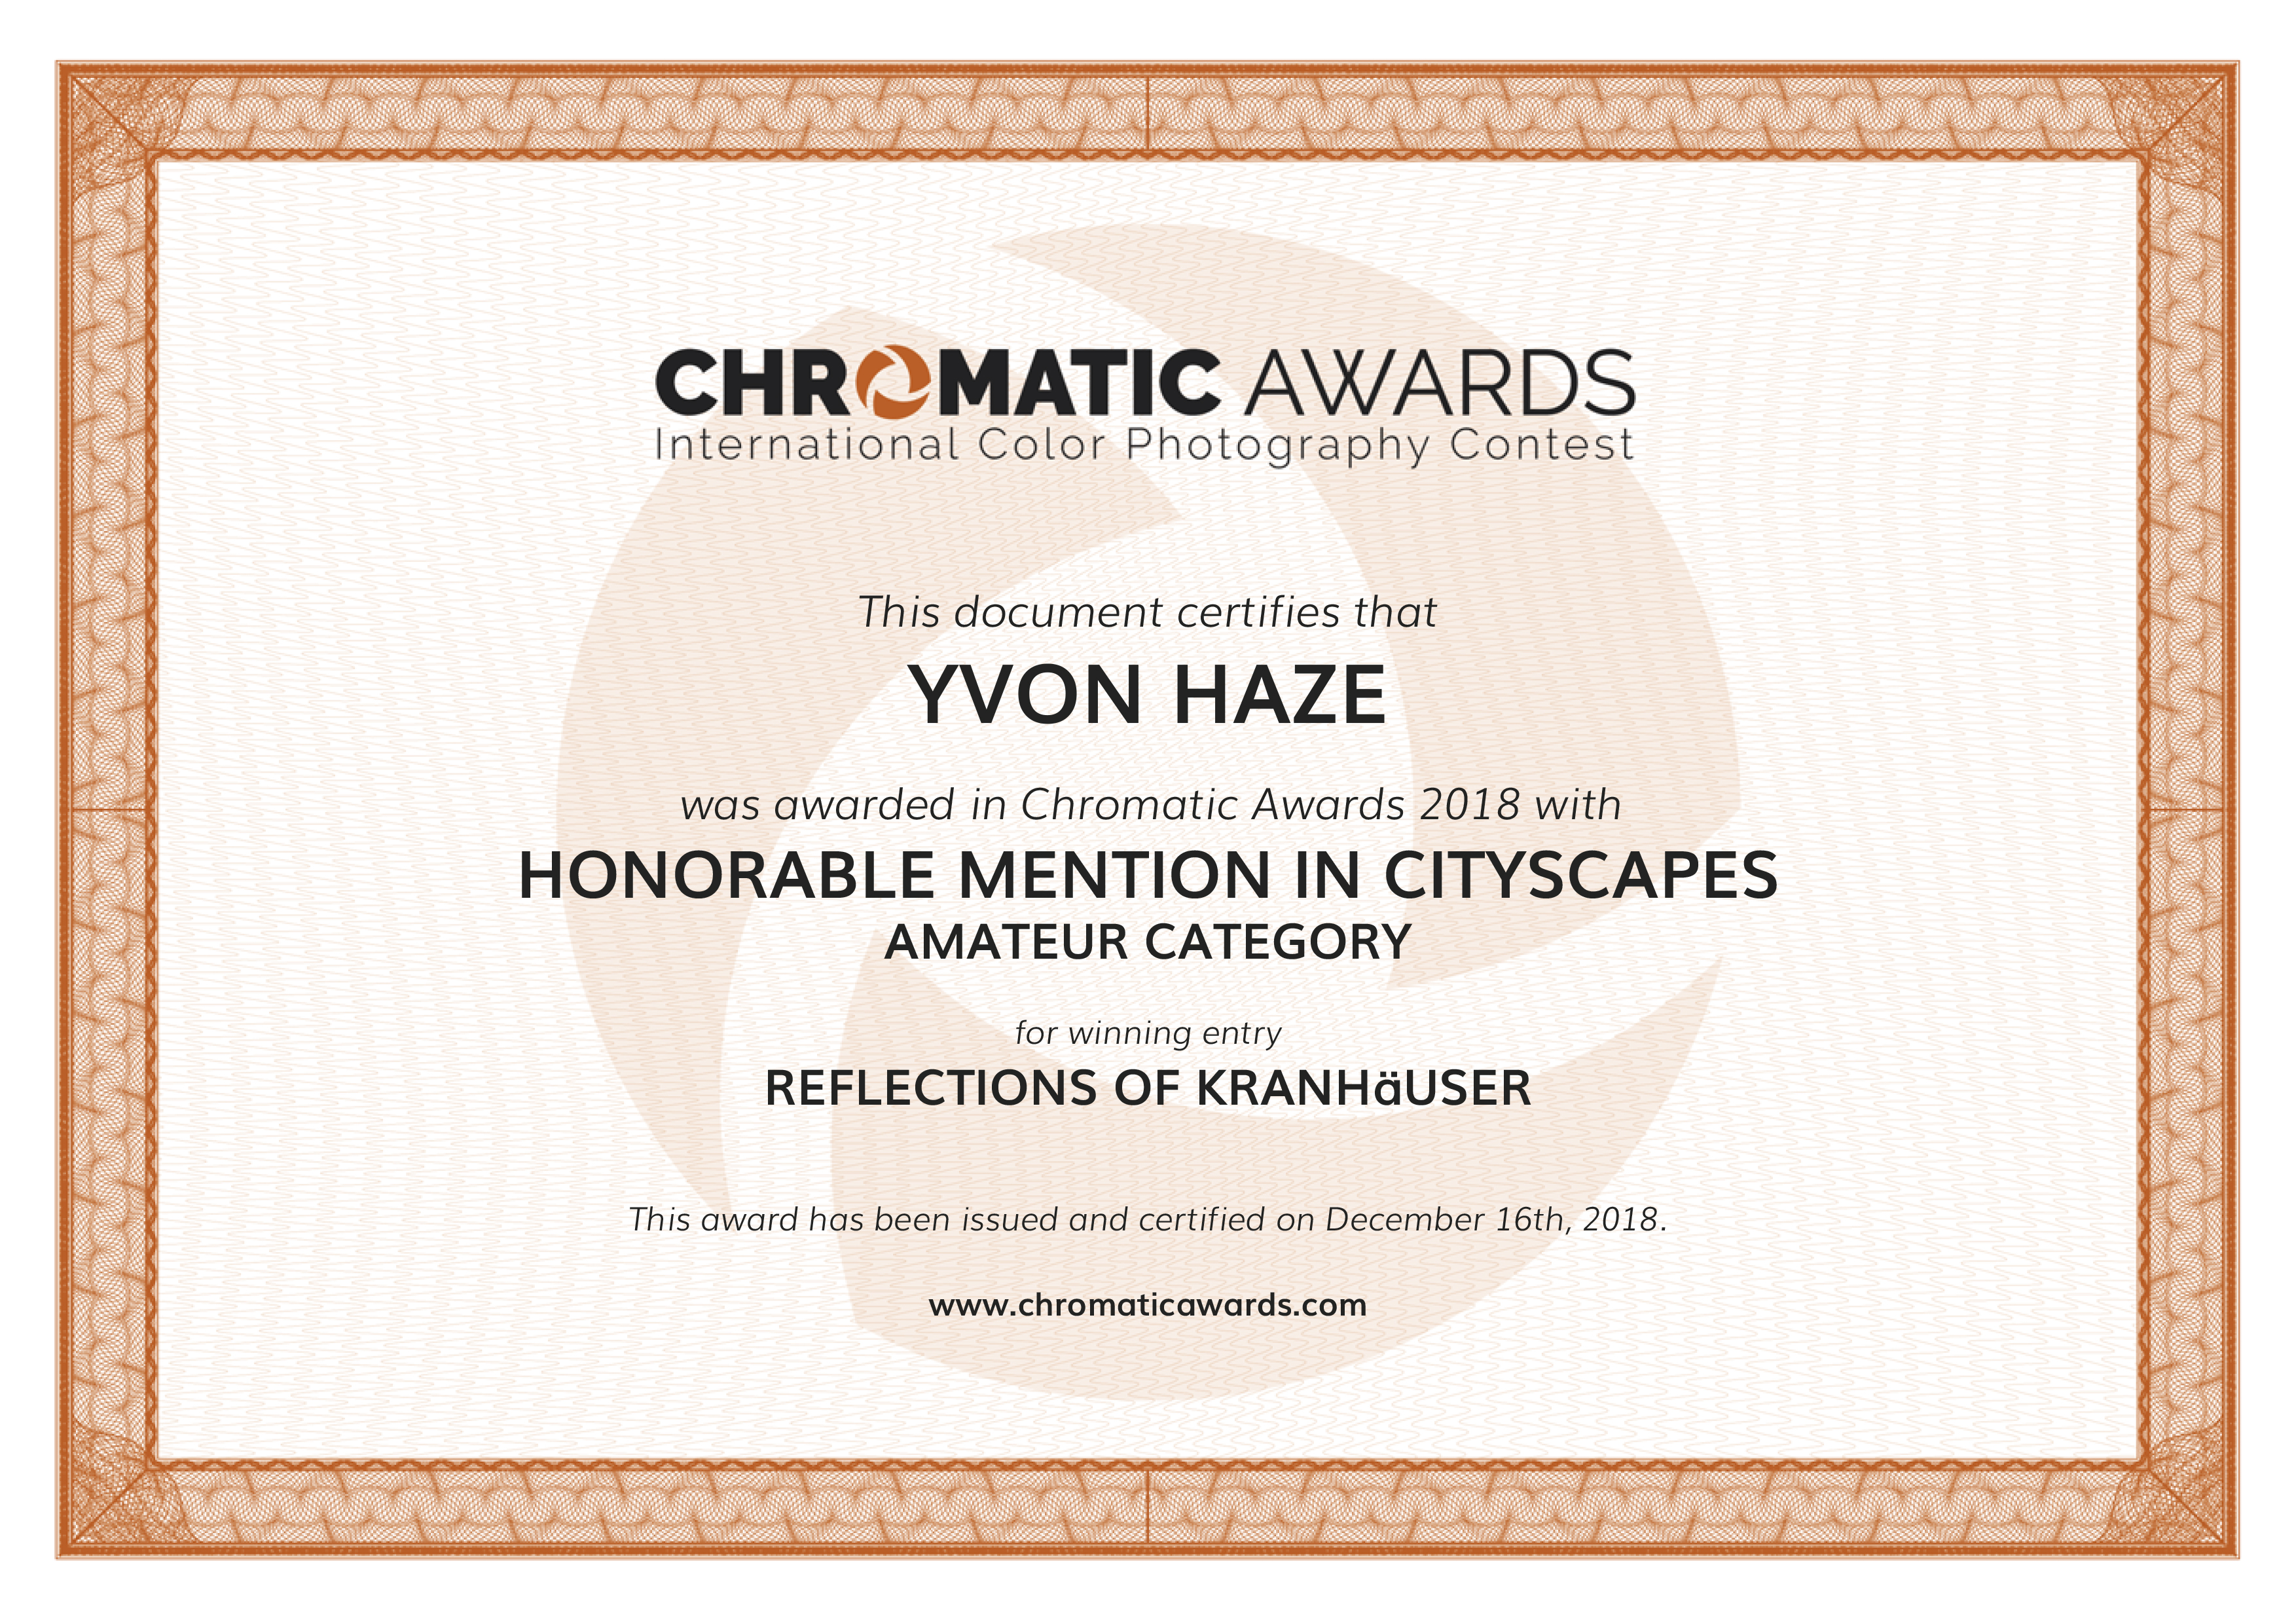 Certificat "Honorable Mention in Cityscapes "à la COMPETITION  CHROMATIC AWARDS 2018